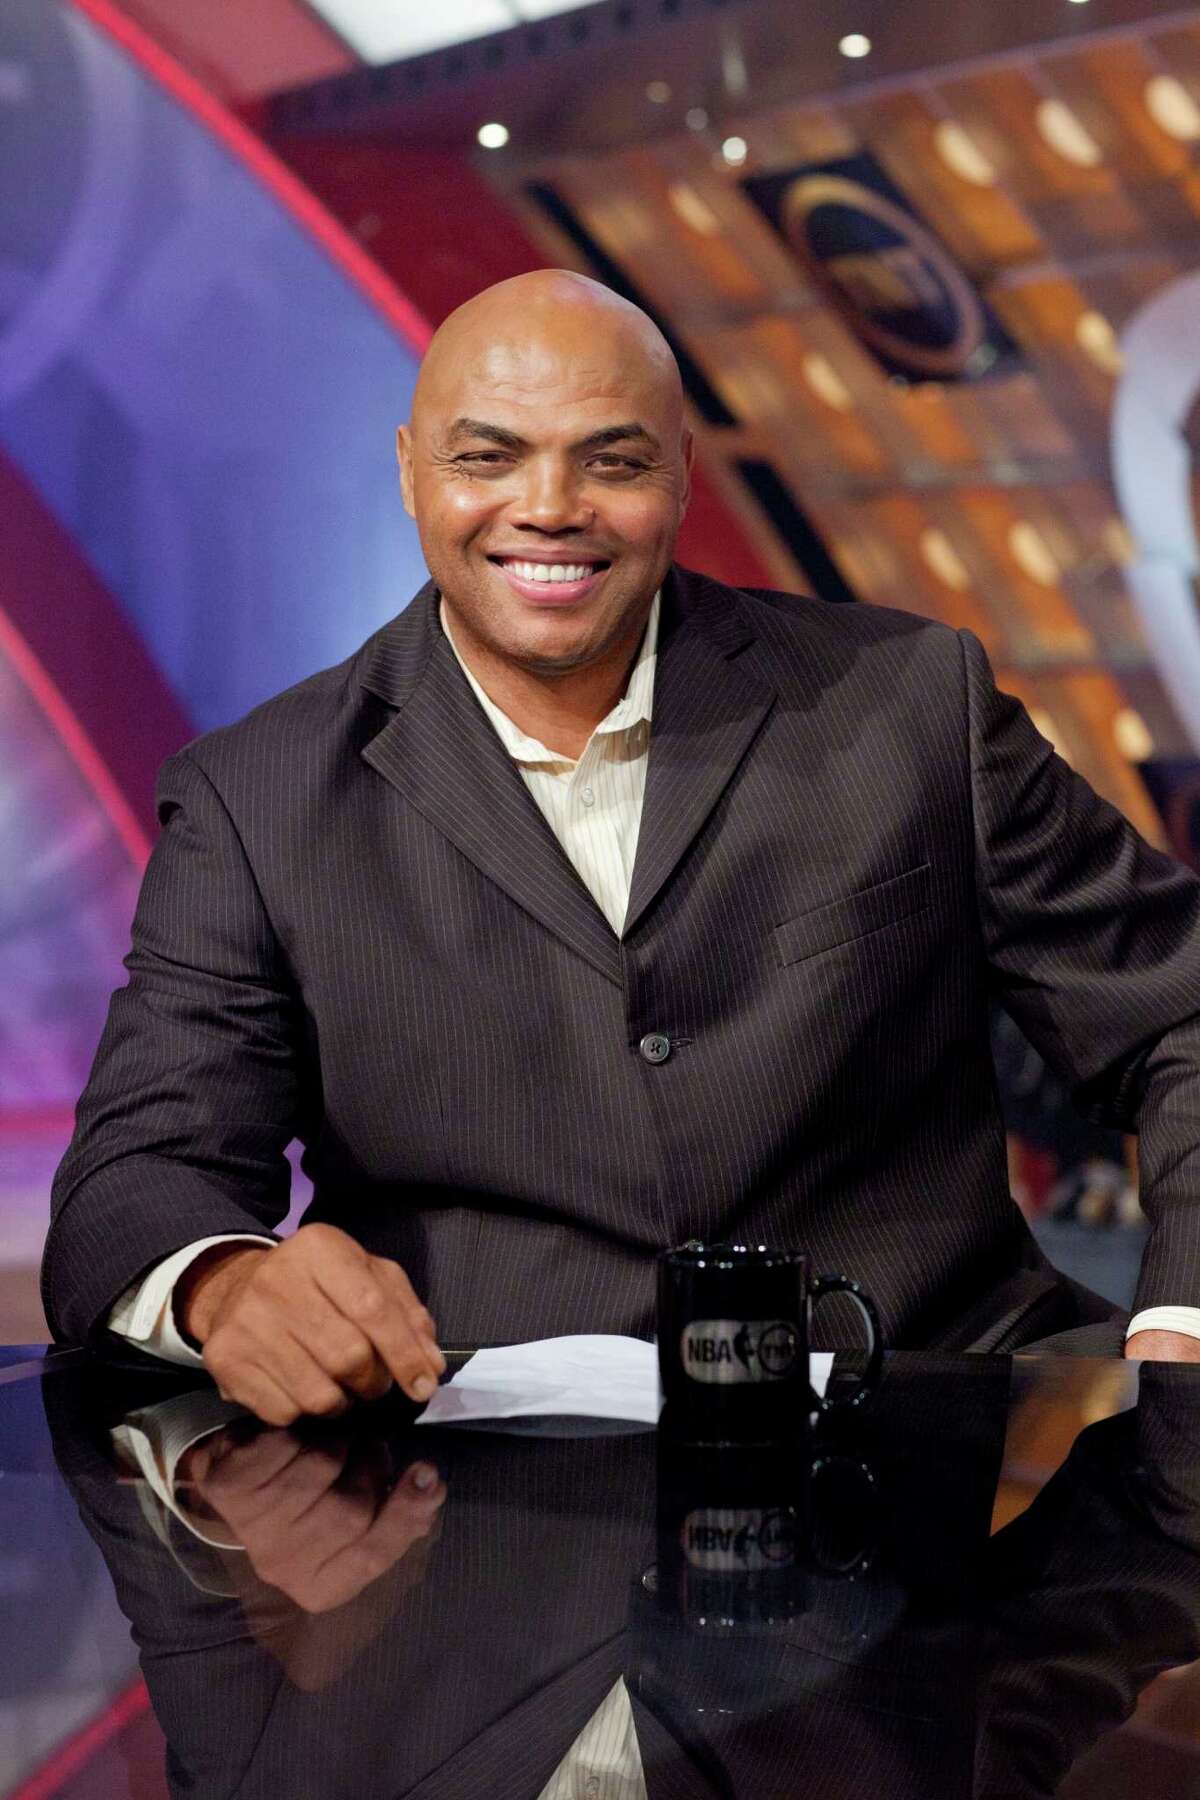 San Antonio residents take exception to TNT sports analyst Charles Barkley's unflattering comments about the city.